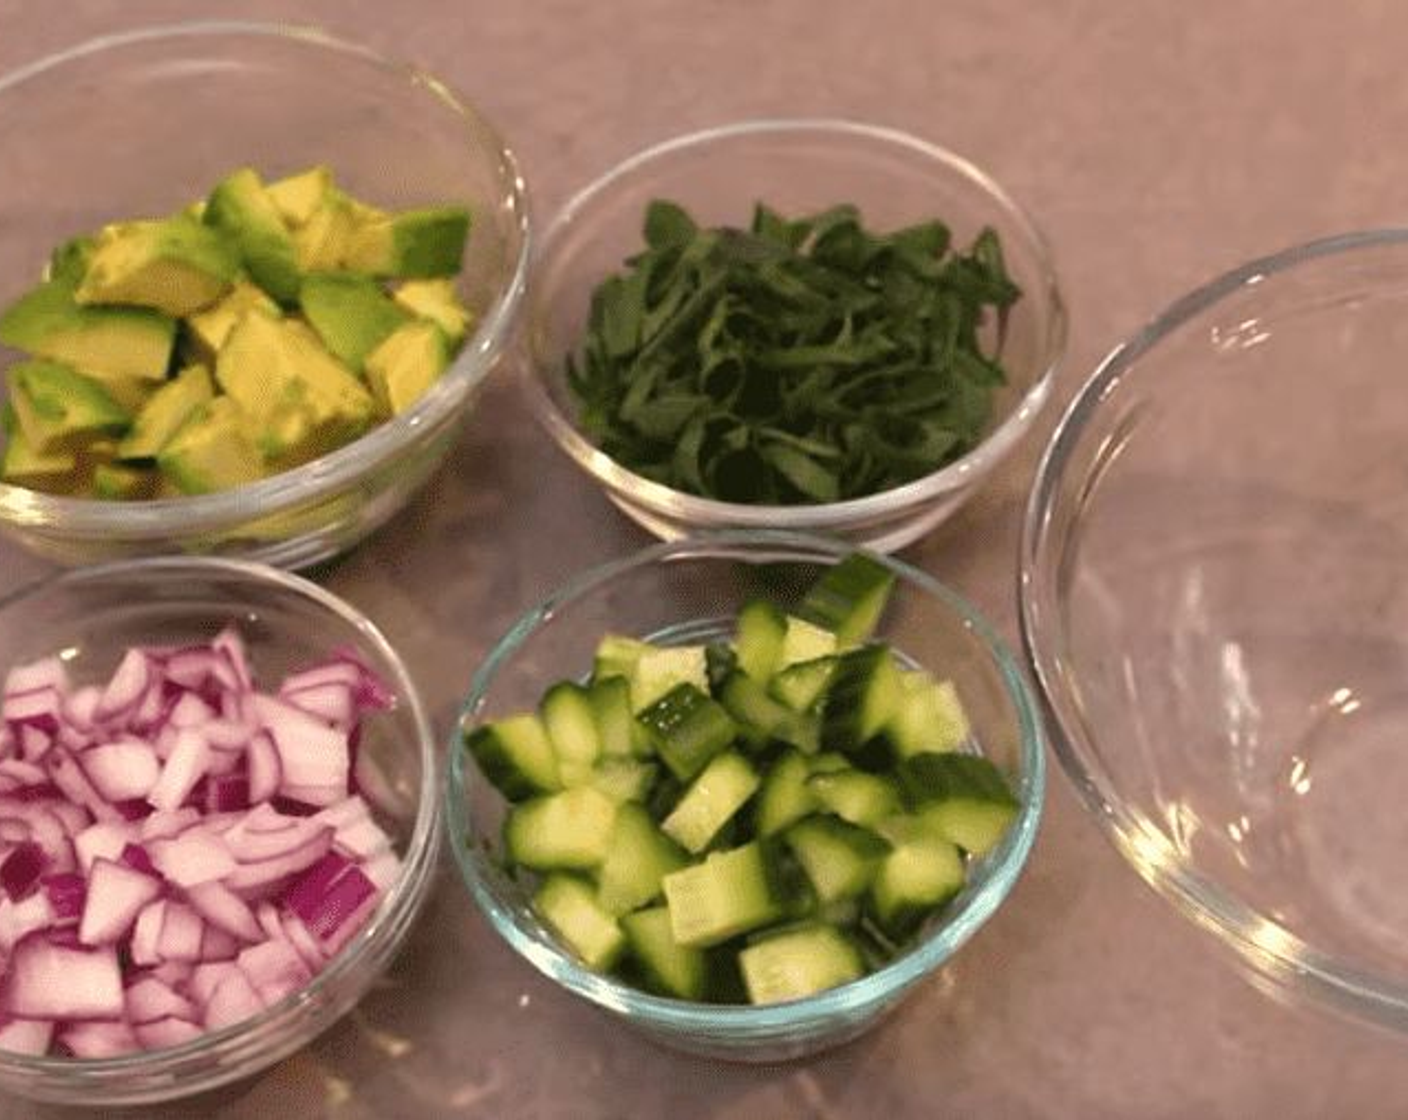 step 1 Into a mixing bowl, add Avocados (4), Red Onion (1/2 cup), Cucumber (1/4 cup), and Spring Onion (1/4 cup).